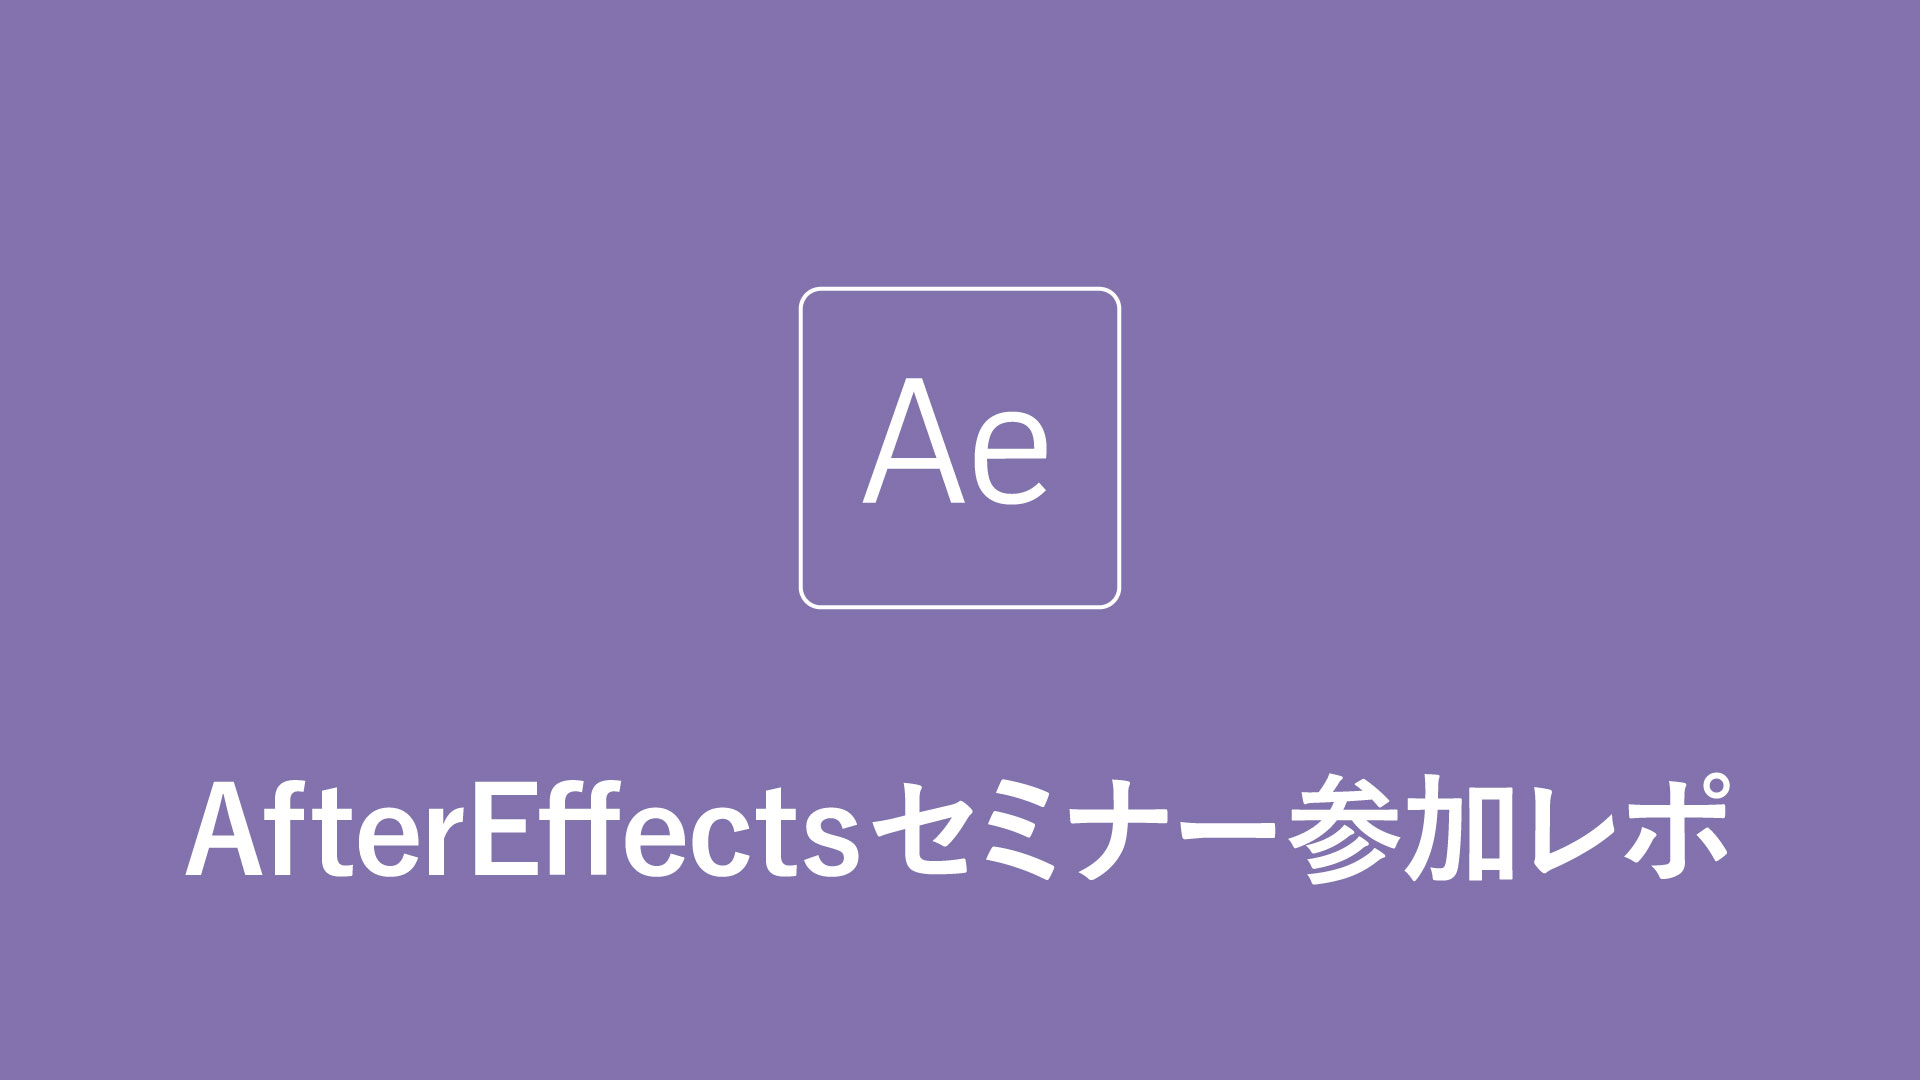 AfterEffects セミナーレポート